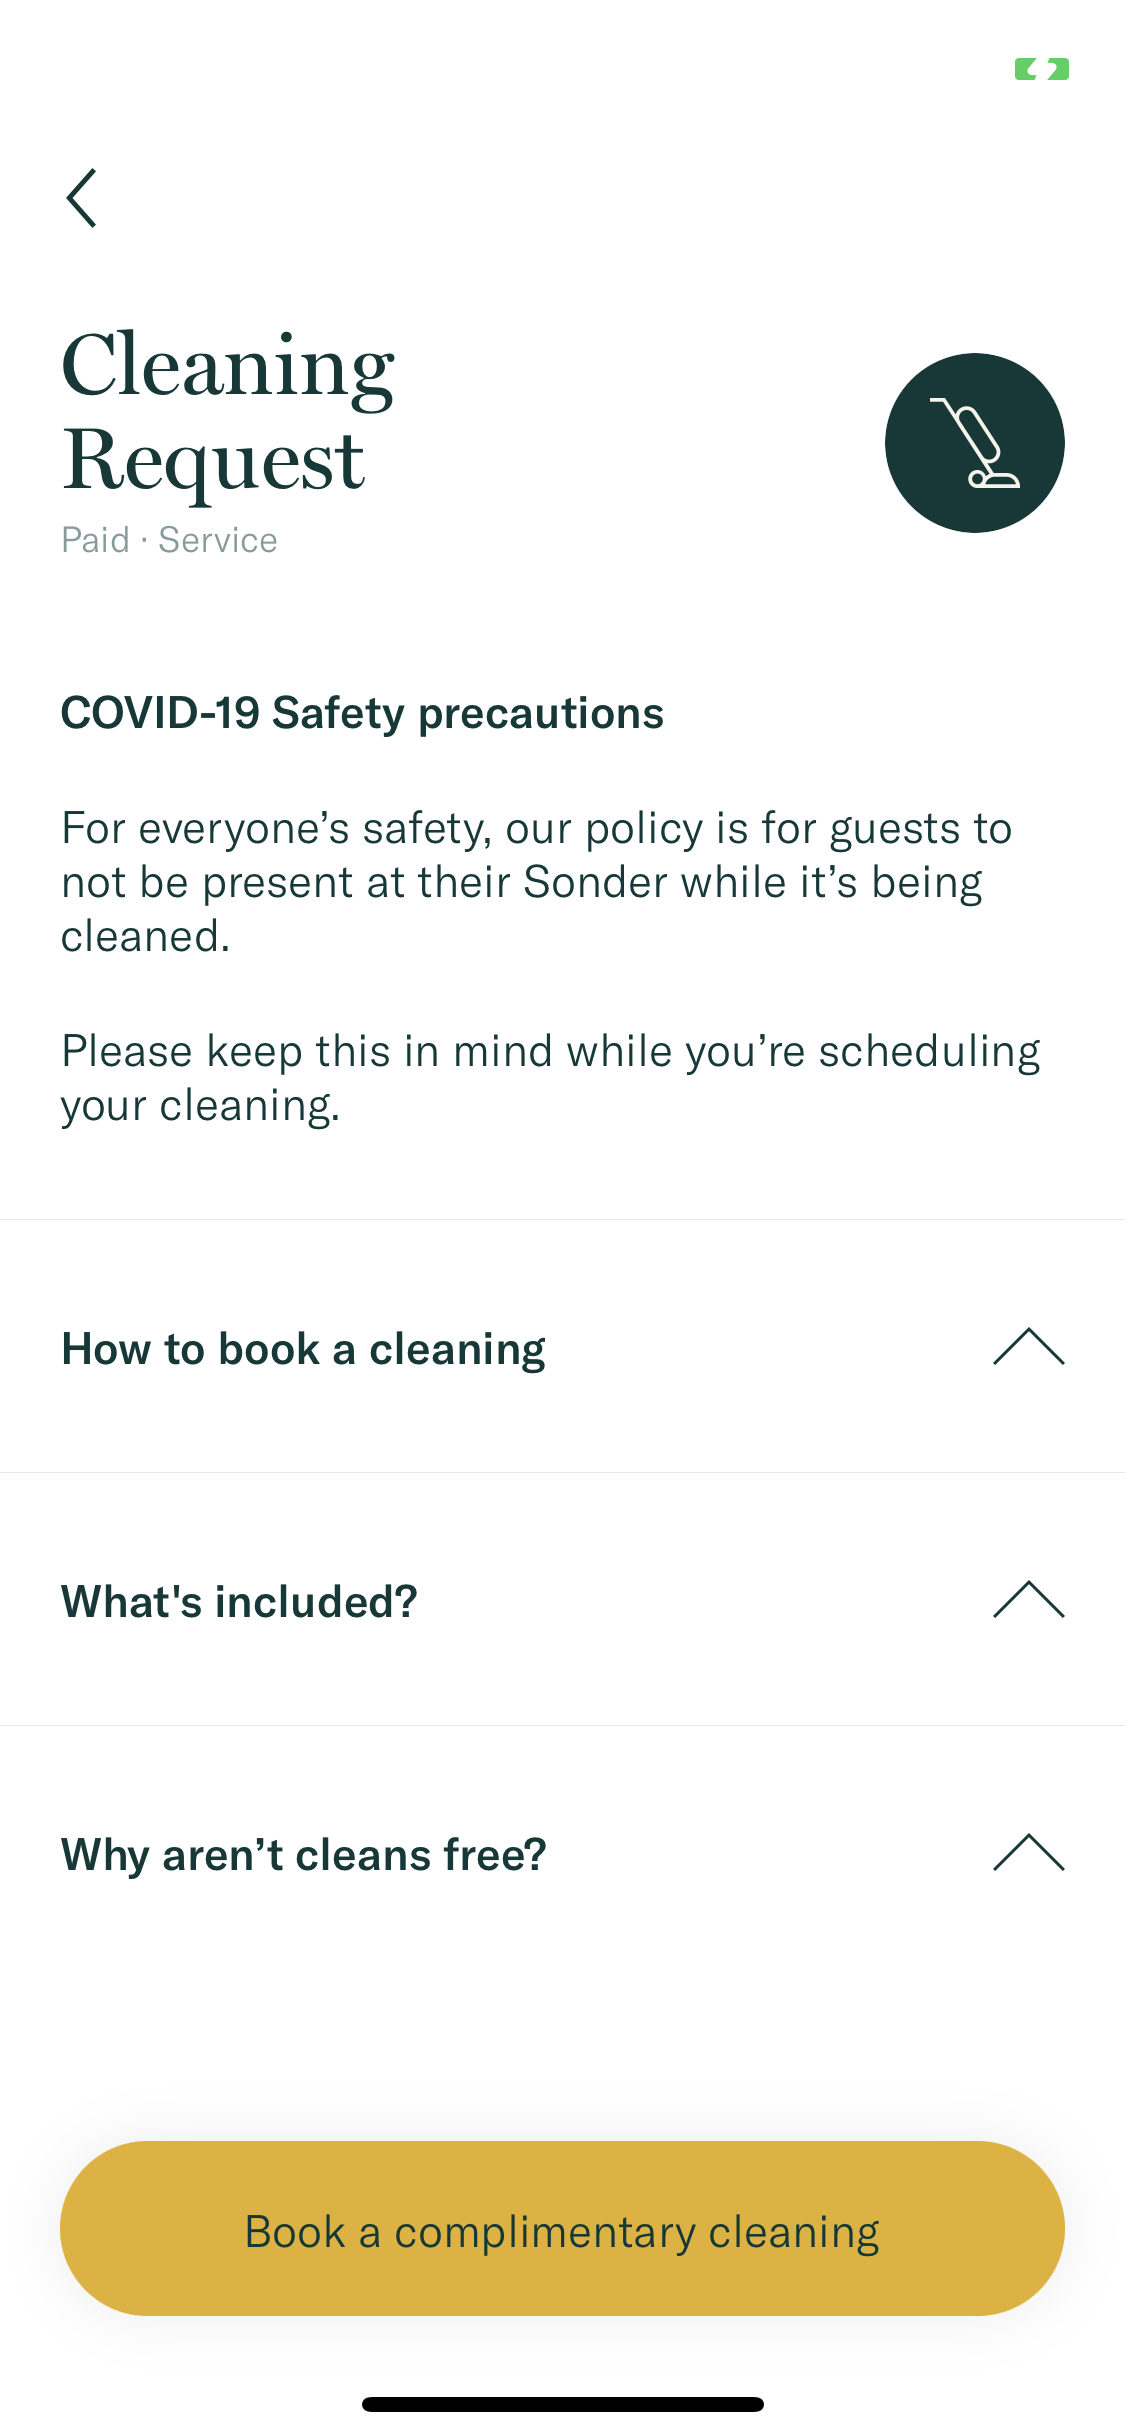 Request cleanings directly in the Sonder app